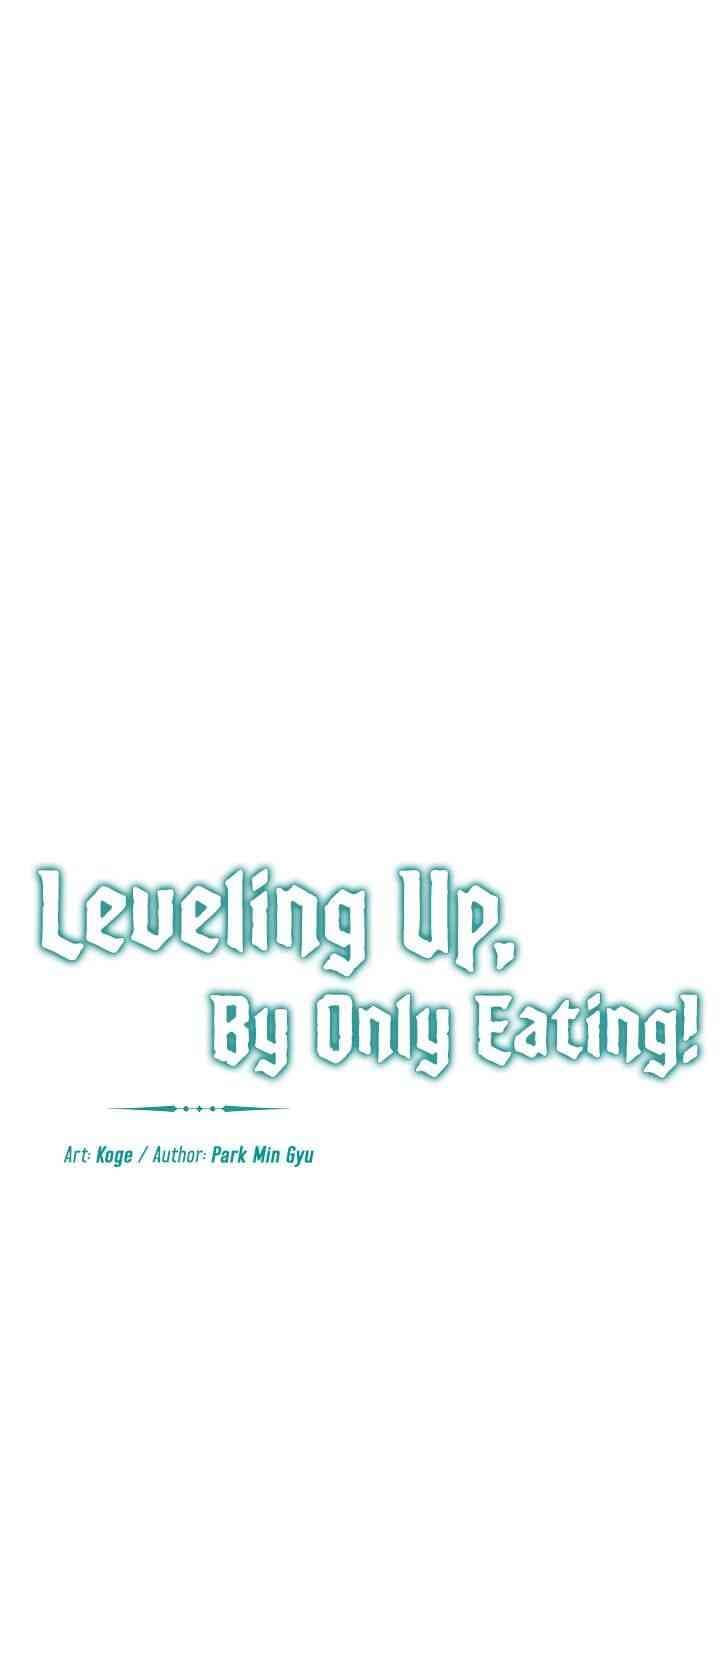 Leveling Up, By Only Eating!7 (49)